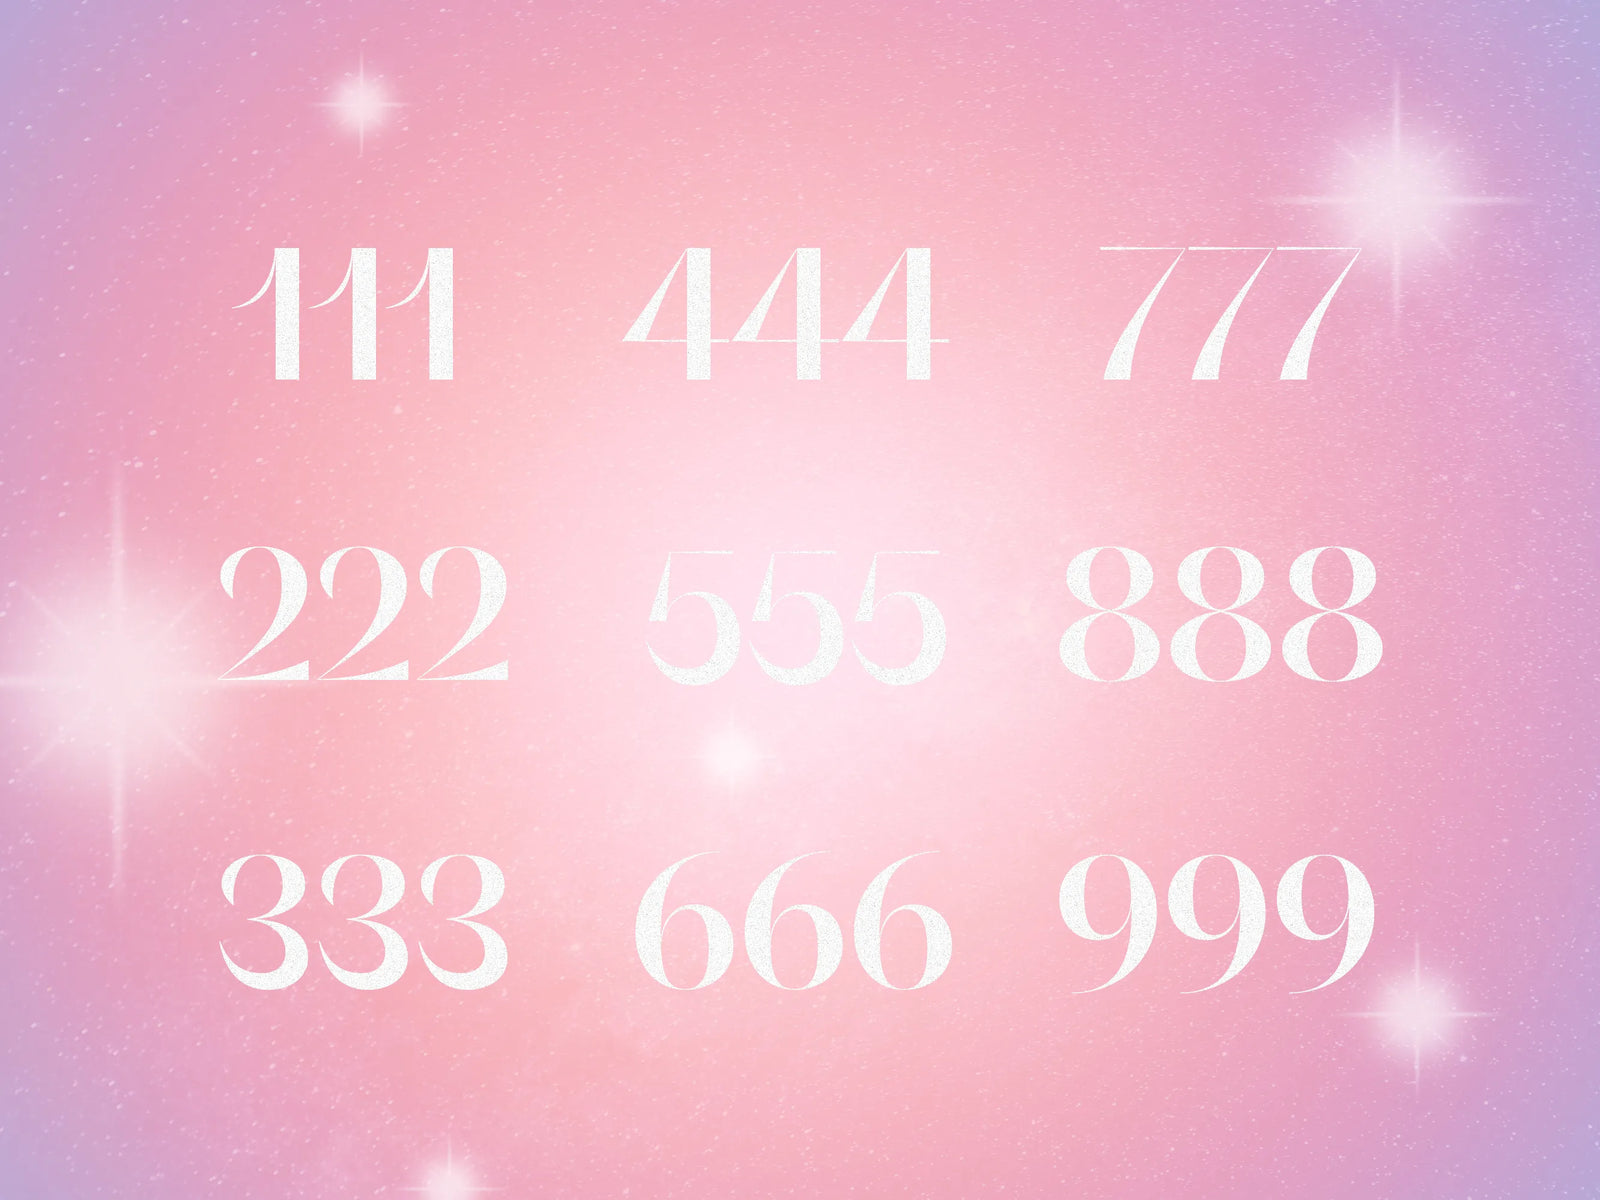 What are angel numbers and what do they mean?